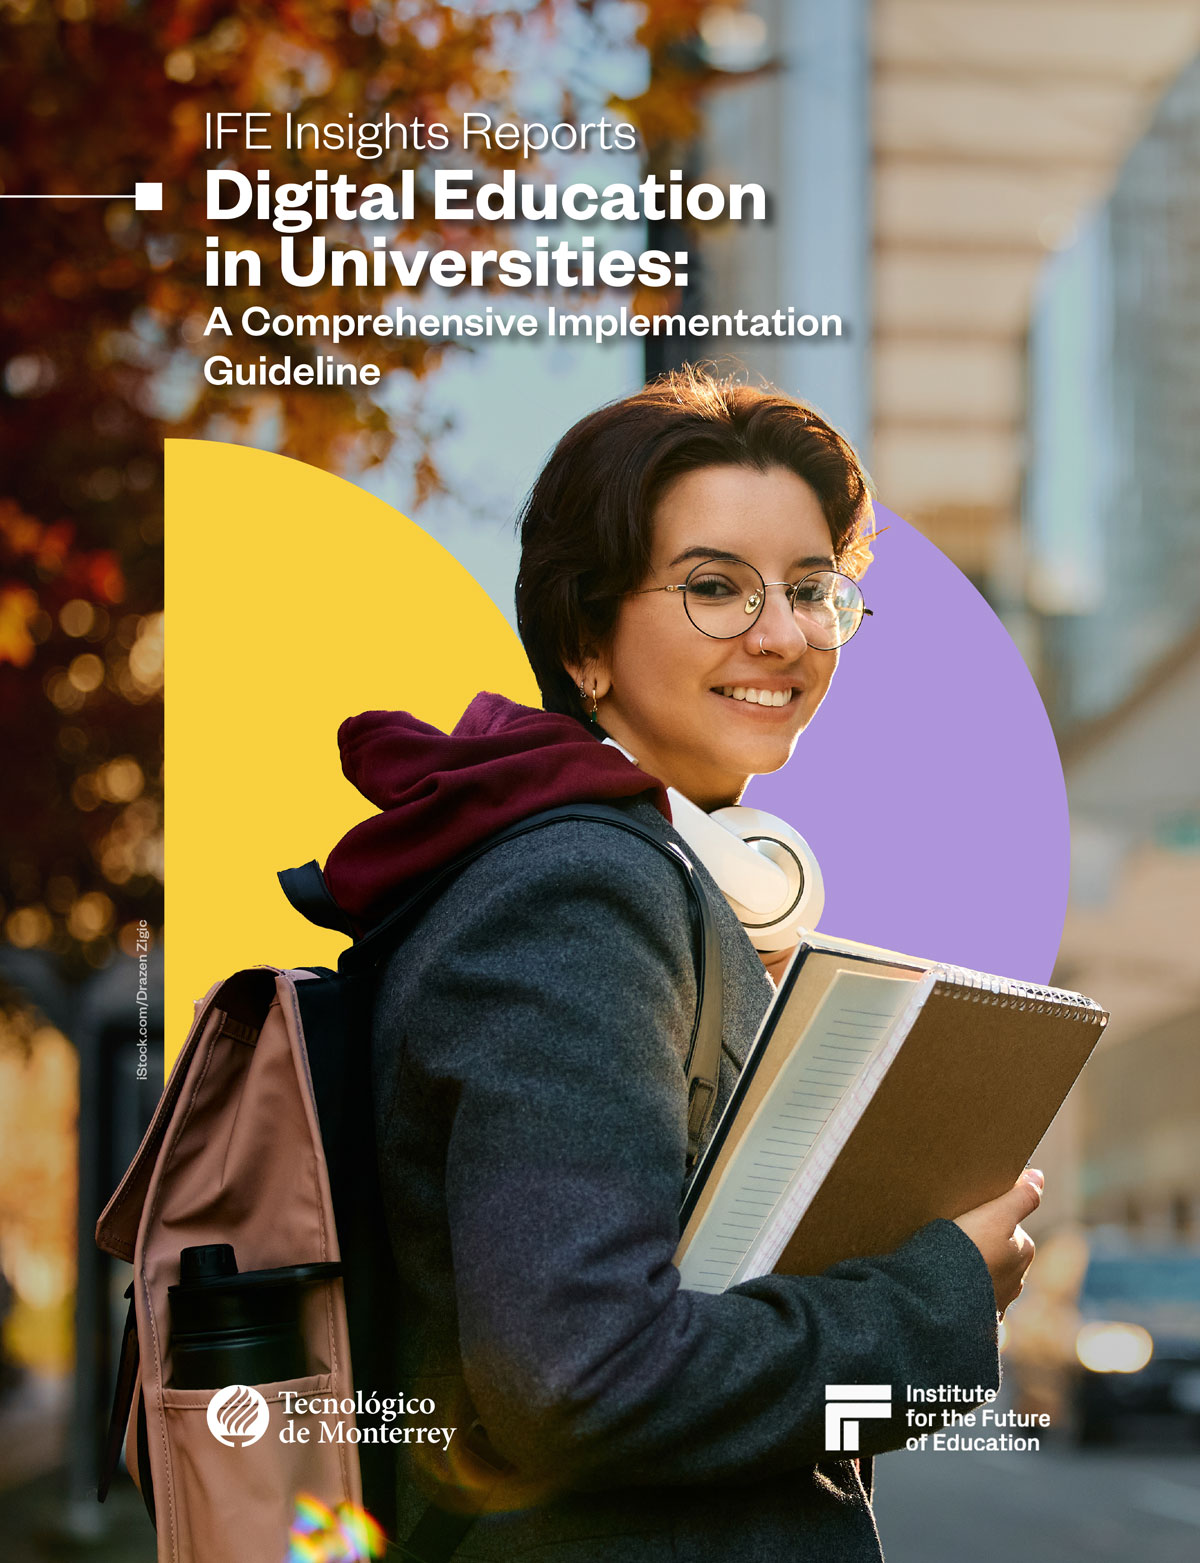 Digital Education in Universities: A Comprehensive Implementation Guideline